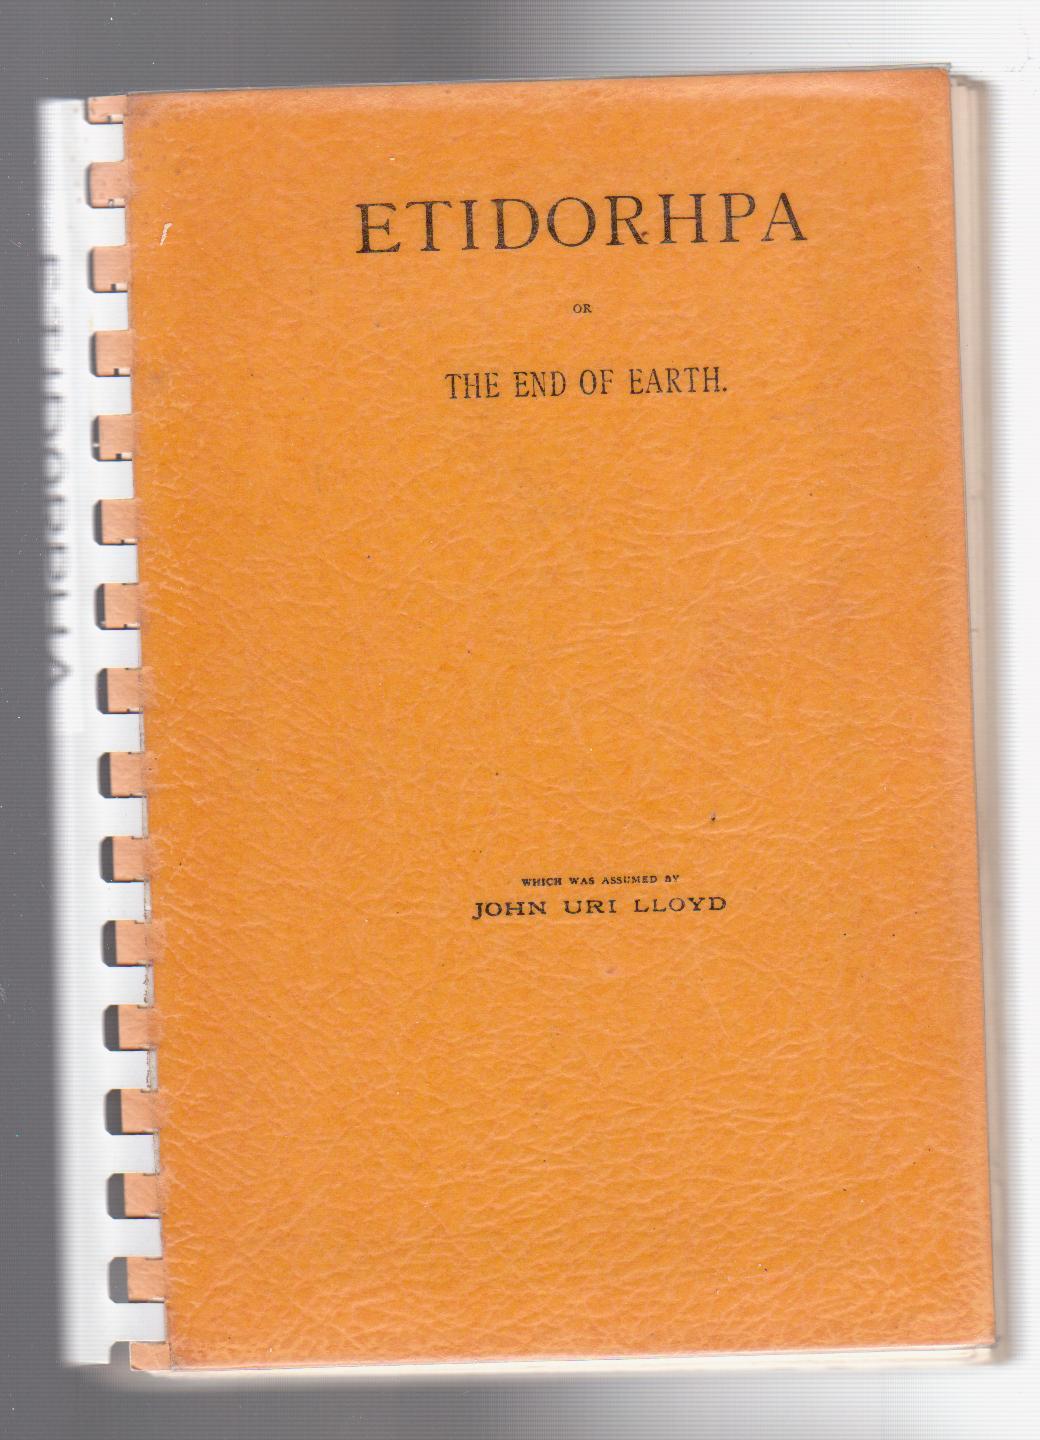 ETIDORPHA or The End of the Earth. The Strange History of a Mysterious Being and The Account of a Remarkable Journey - Drury, Llewellyn, John Uri Lloyd and J. Augustus Knapp (Illus)